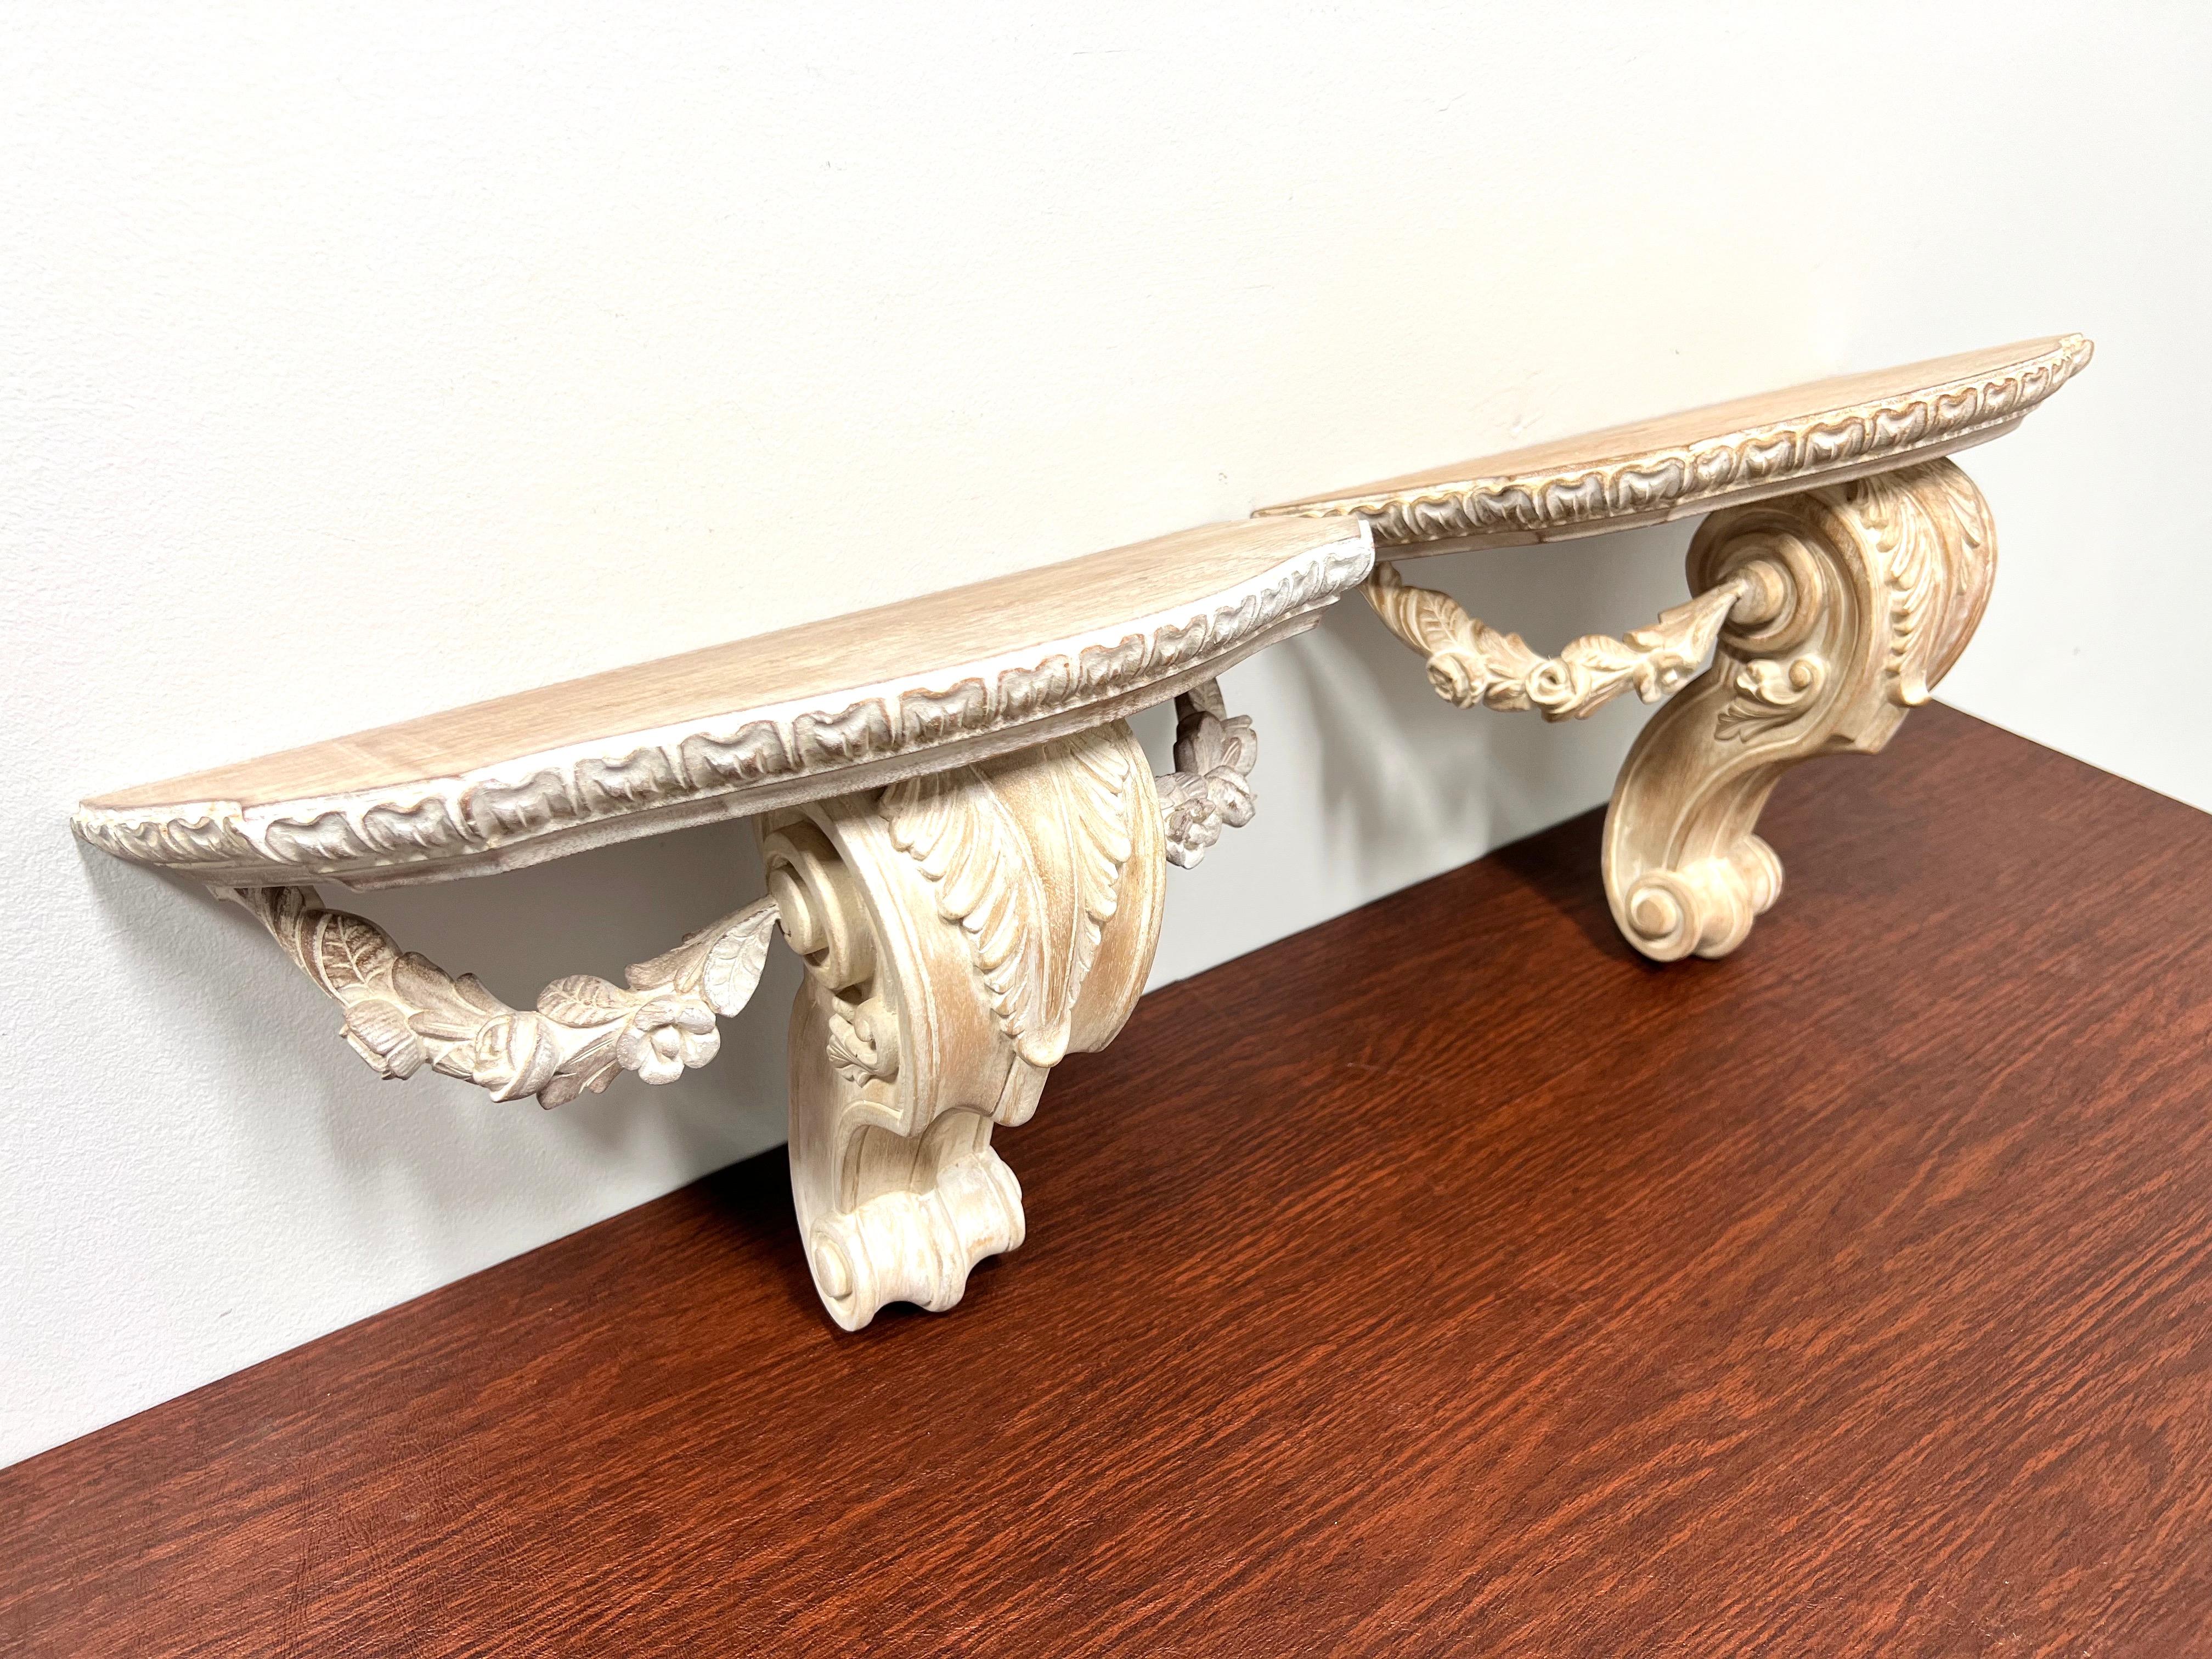 A pair of Rococo style wall bracket shelves, unbranded. Solid wood with a whitewashed finish, flat serpentine shaped display surface, and decorative floral & foliate swags. Dual brass screw holders on back for wall hanging. Made in the USA,circa